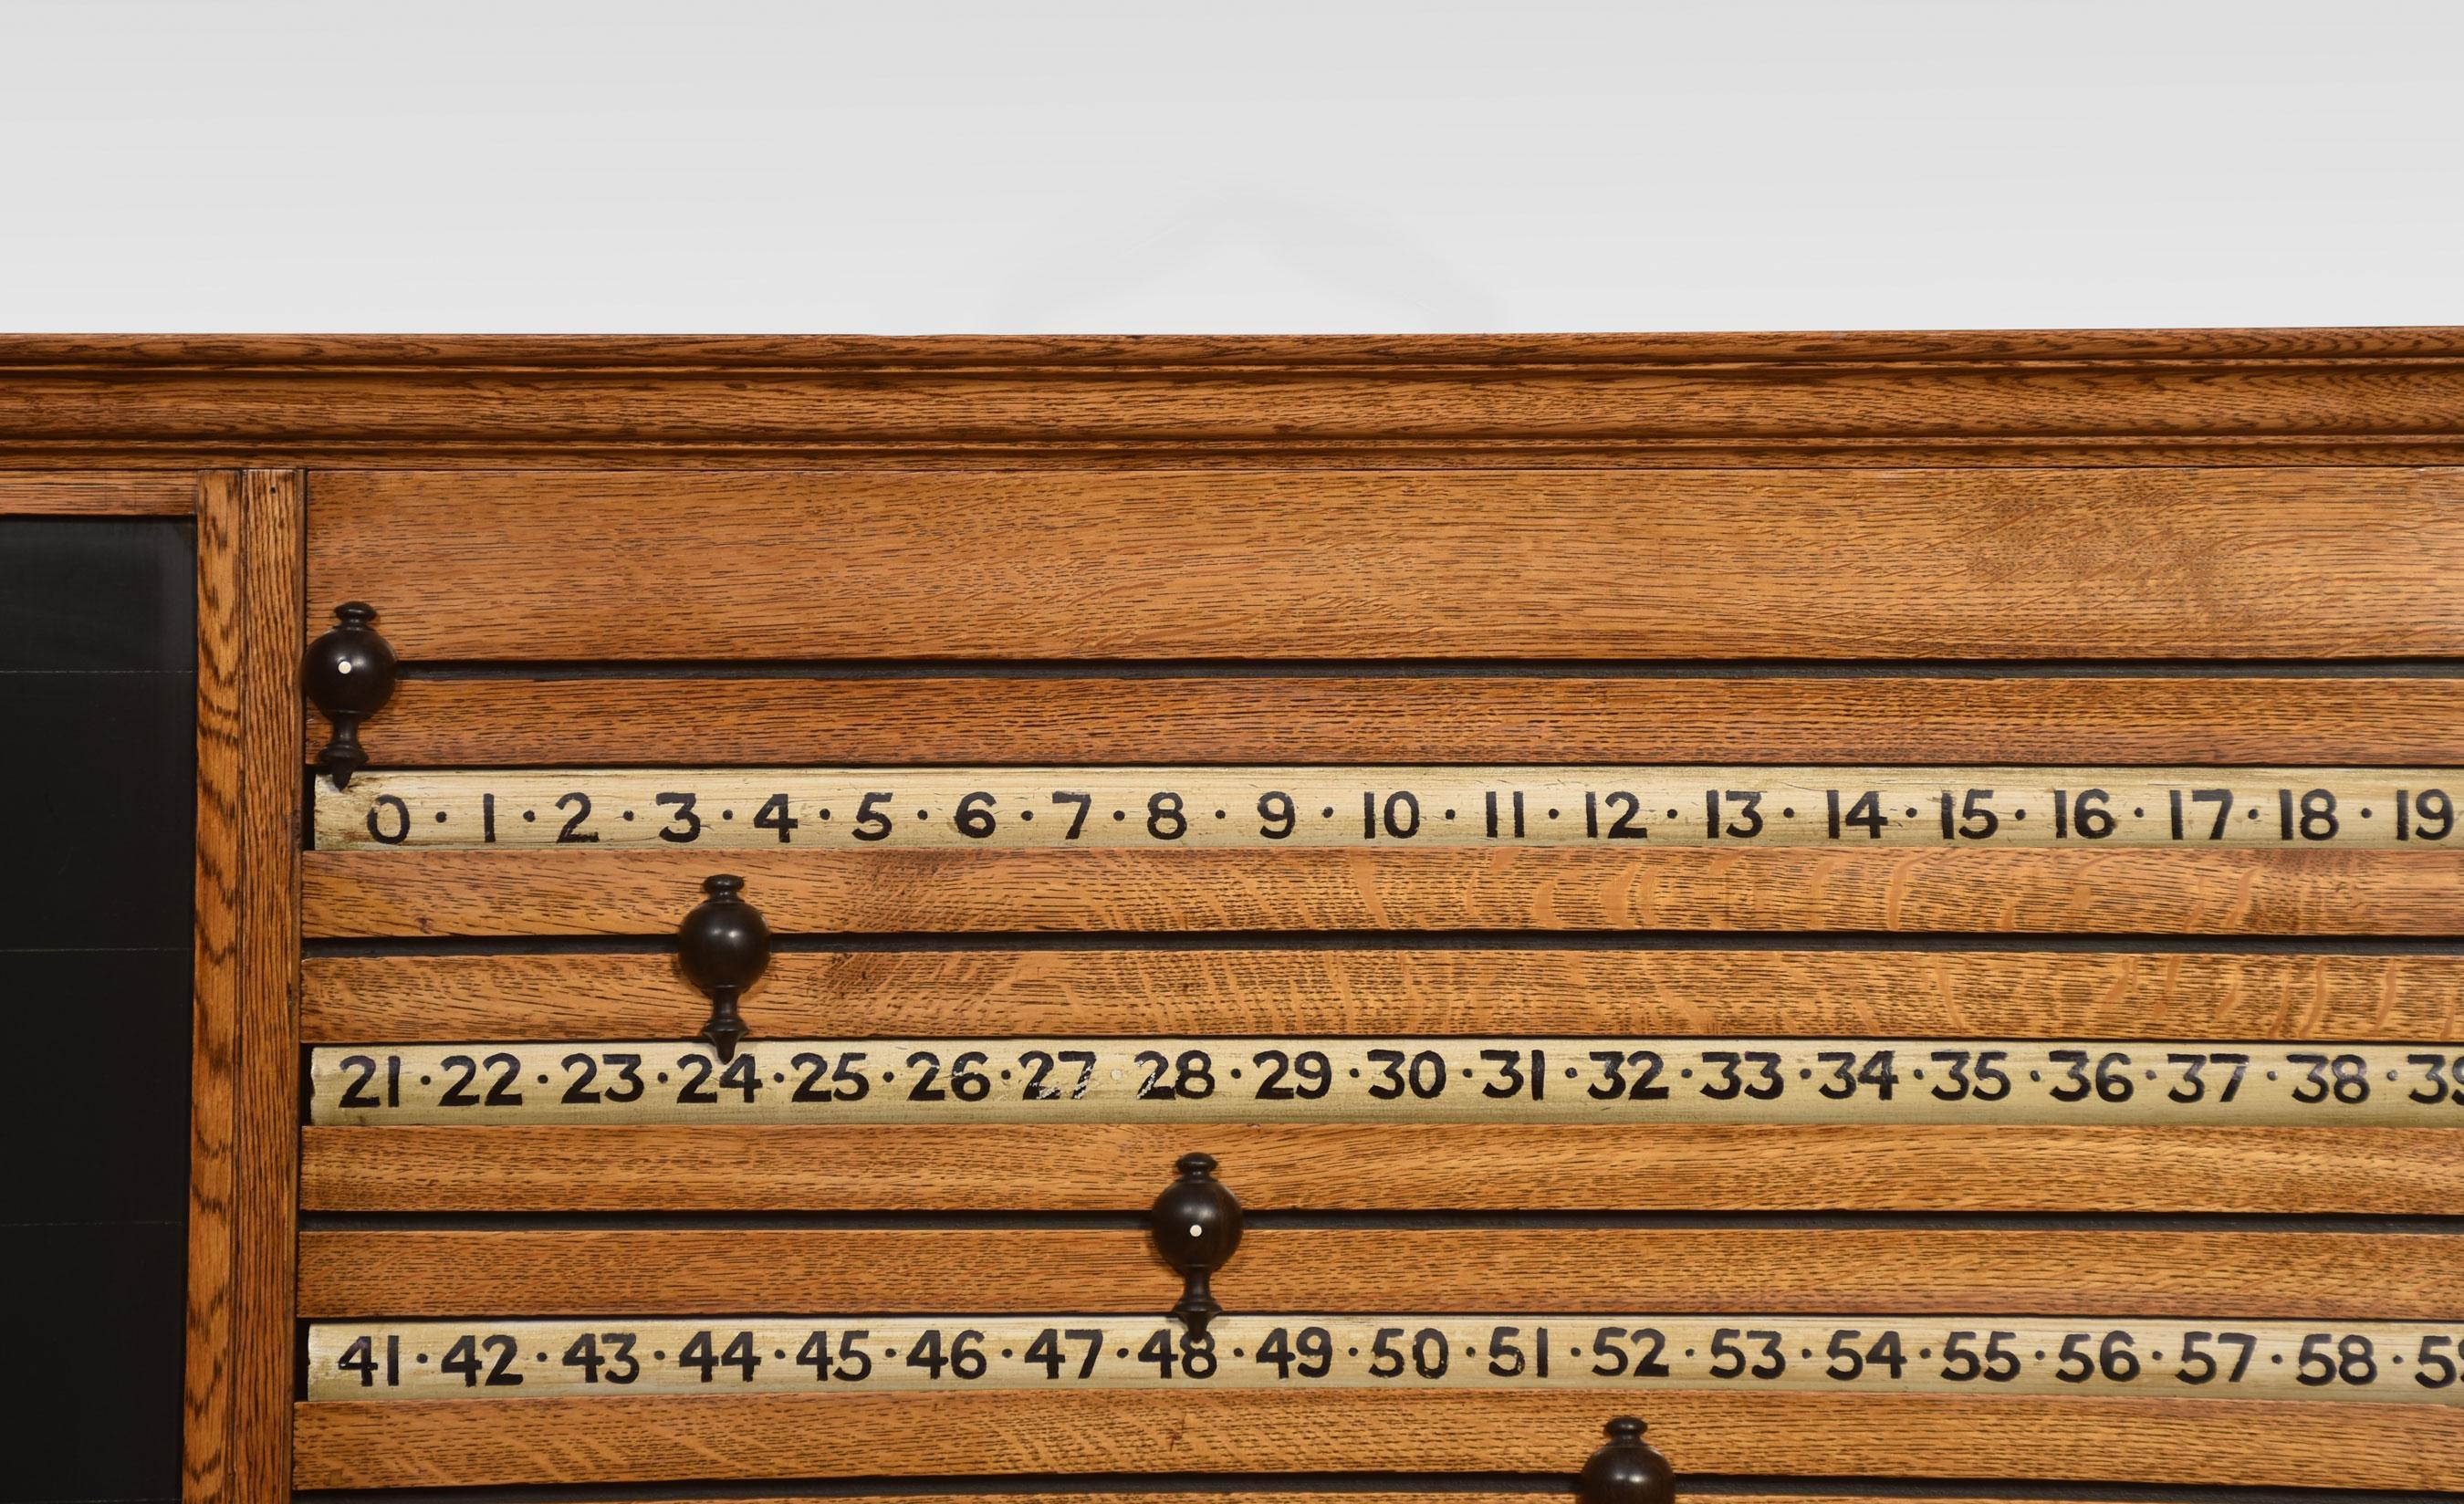 Billiards scoreboard encased in an oak frame having four roller scores with ebonised markers and knobs. Retaining the original chalkboard.
Dimensions
Height 20 Inches
Width 43.5 Inches
Depth 3.5 Inches.